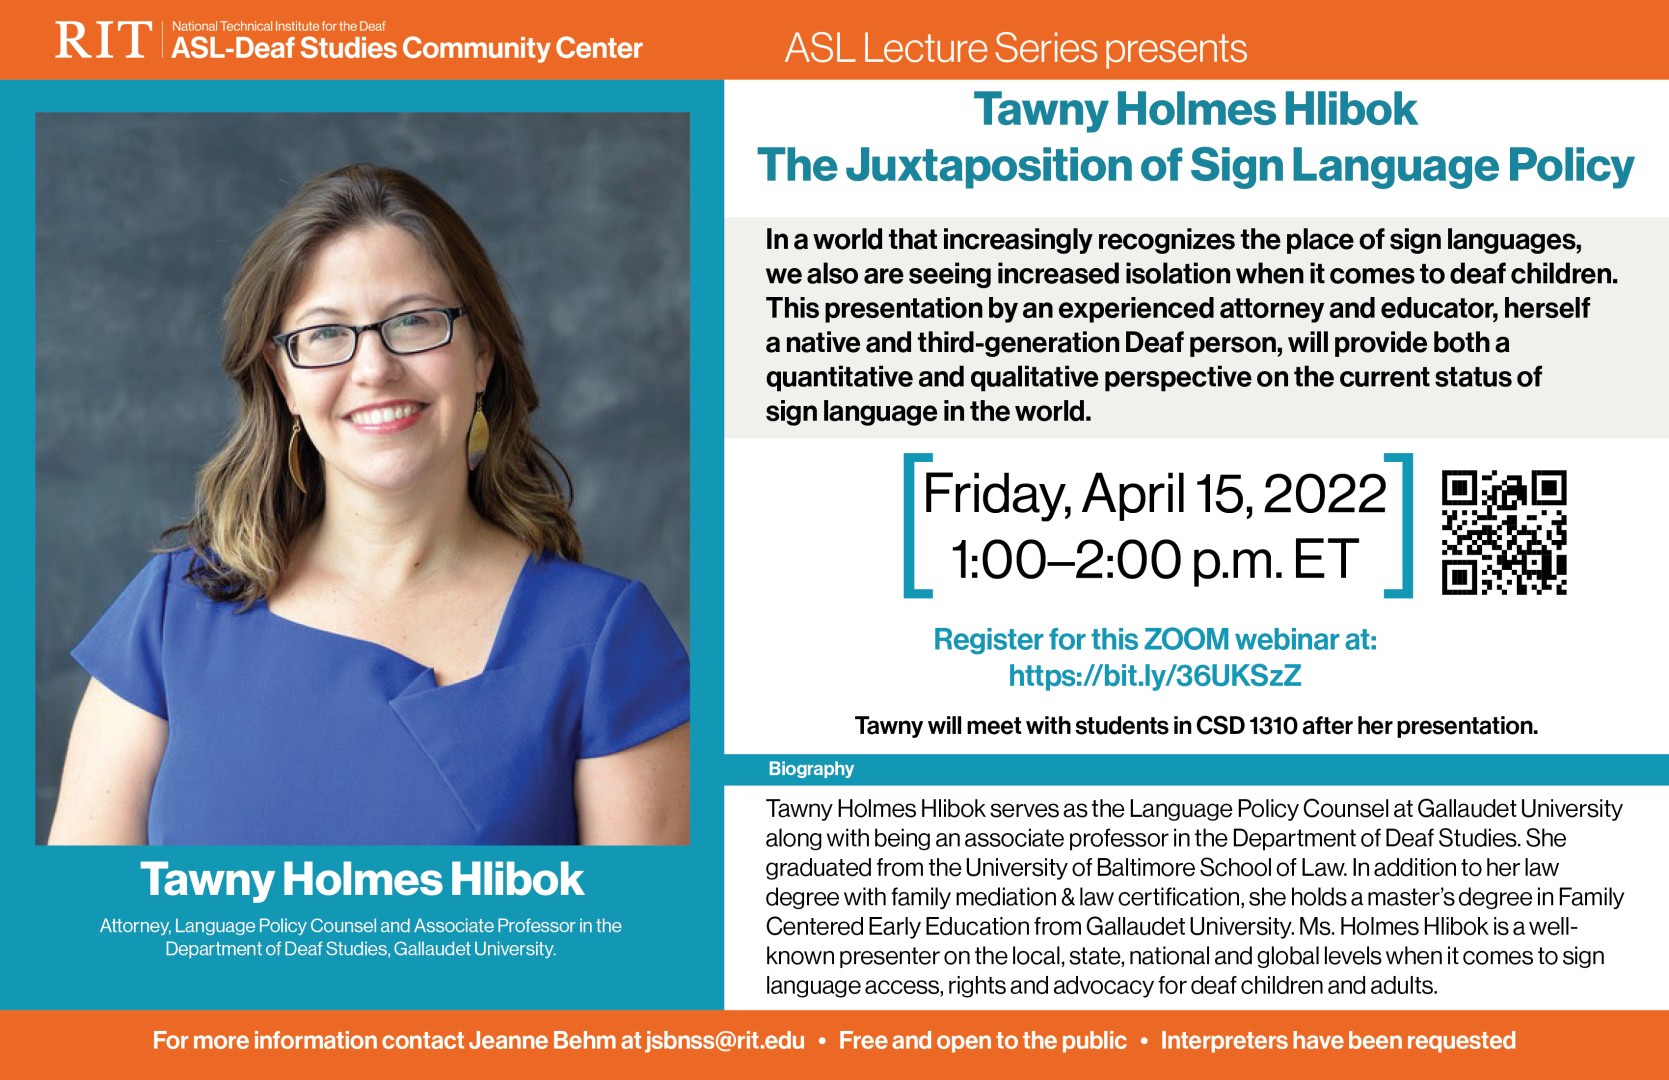 ASL Lecture Series presents: Tawny Holmes Hlibok  The Juxtaposition of Sign Language